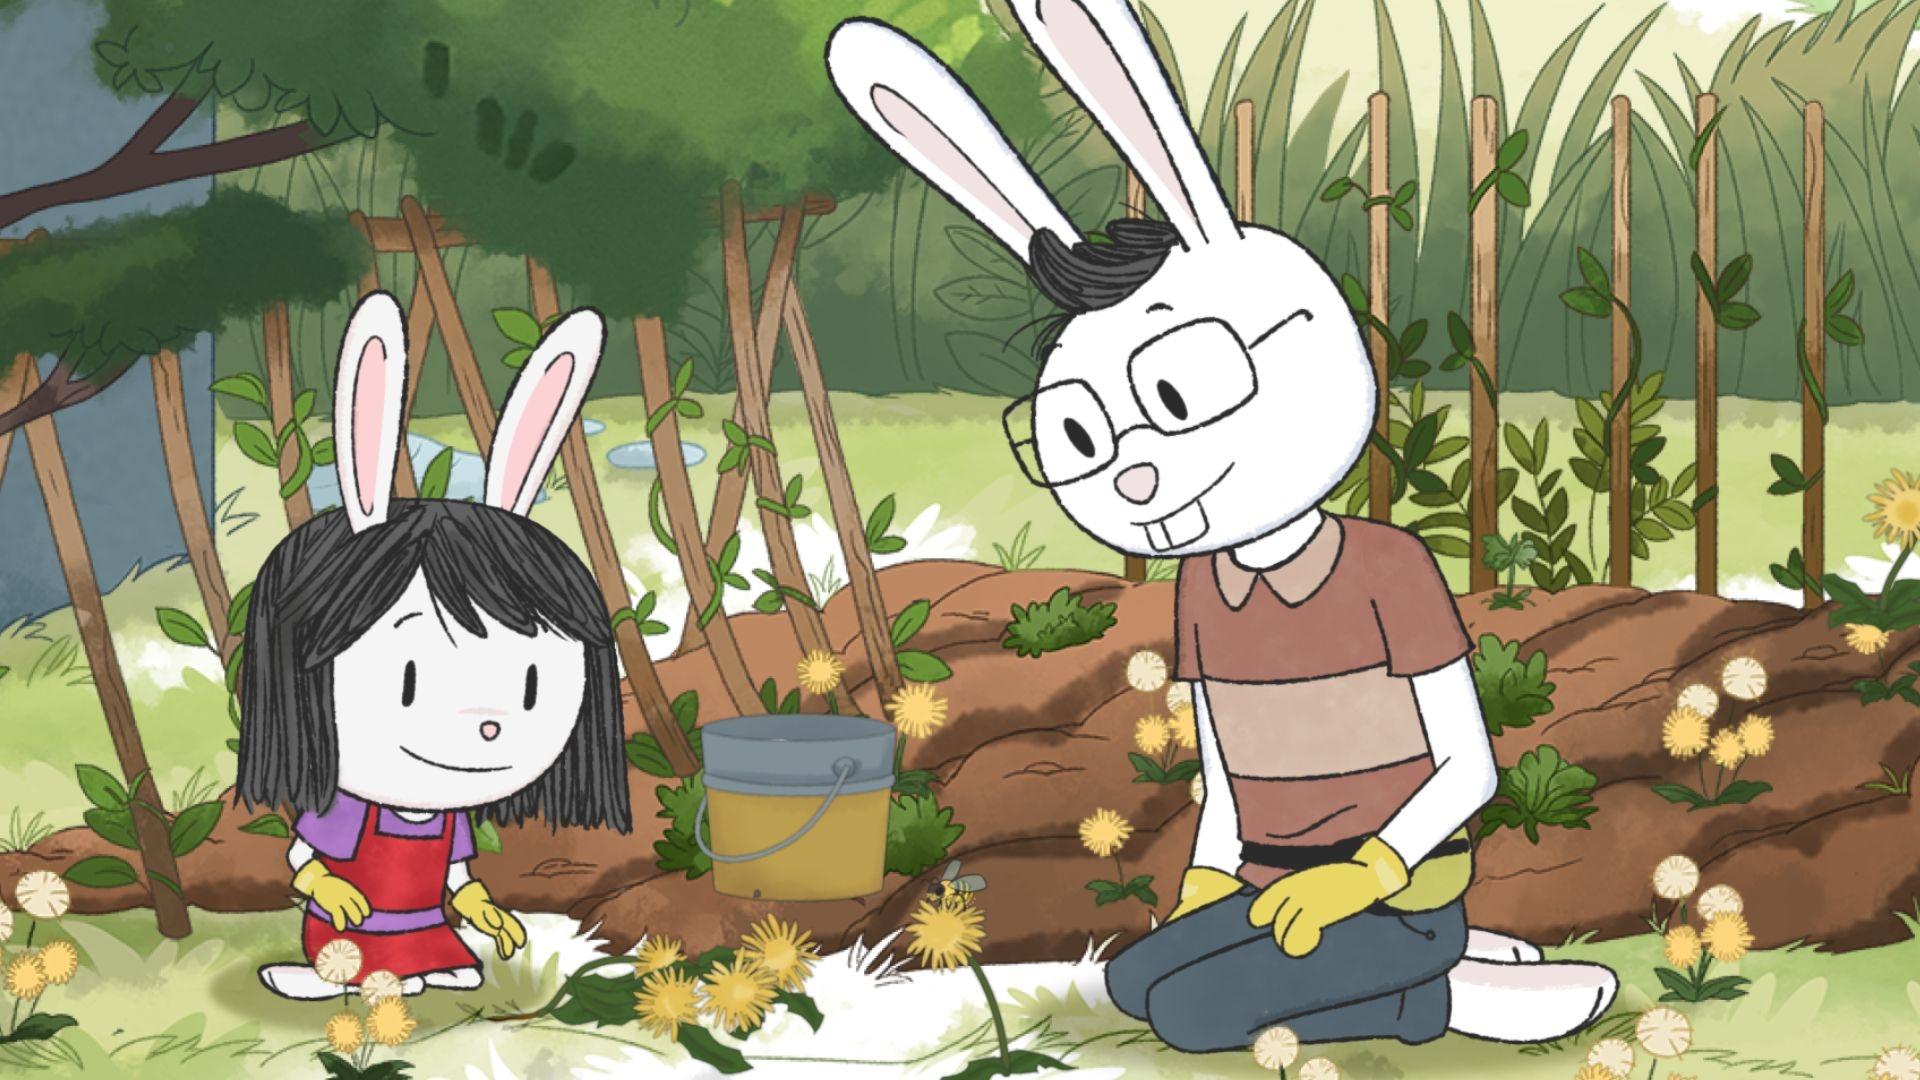 Elinor sits and picks dandelions with her father, Mr. Rabbit, as featured in Elinor Wonders Why.